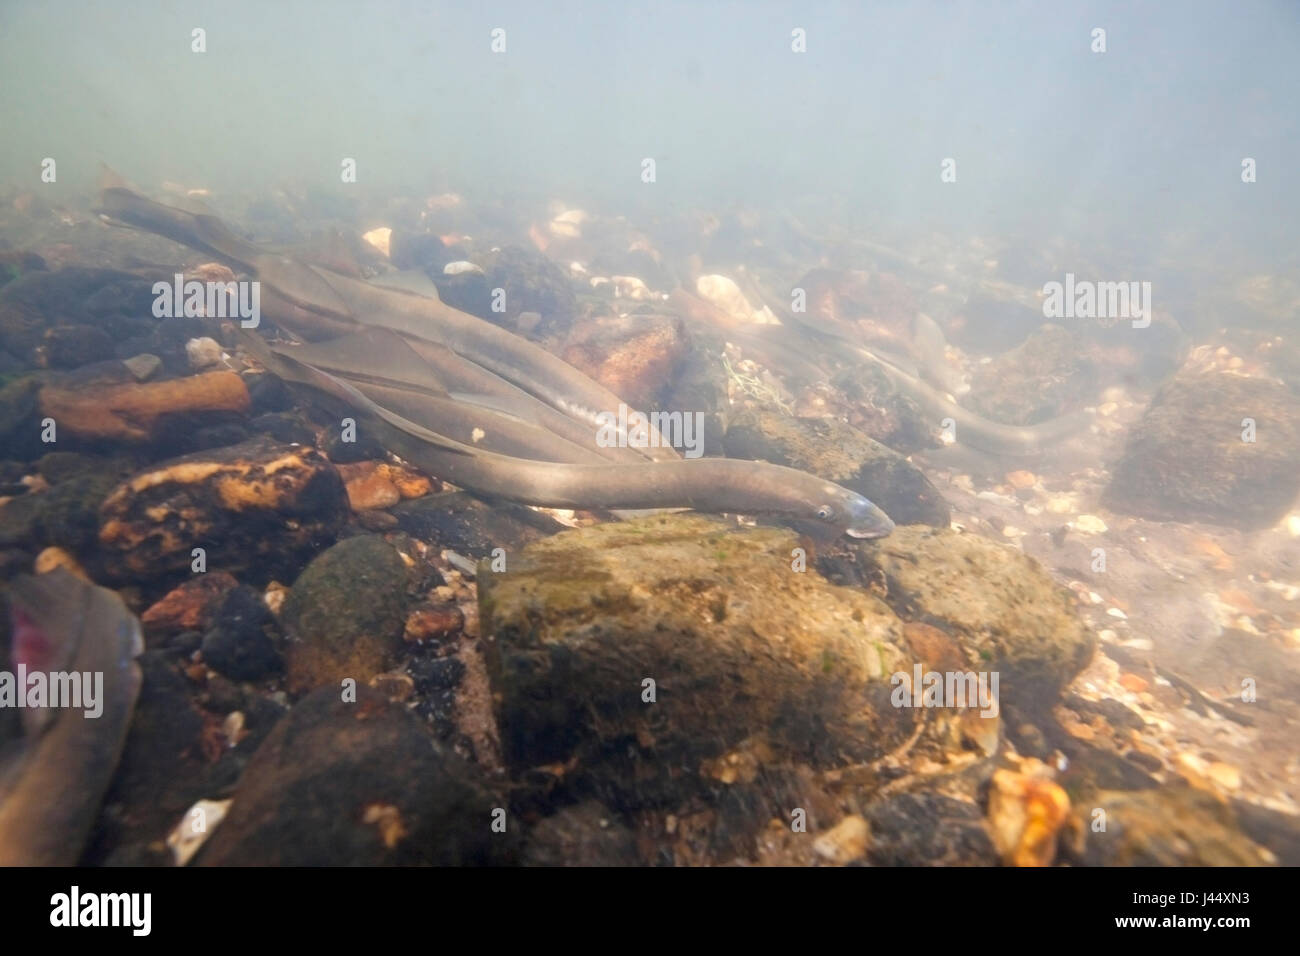 river lampreys on a spawning site in the Netherlands, the males make nestholes between the rocks were the females can lay their eggs. Stock Photo